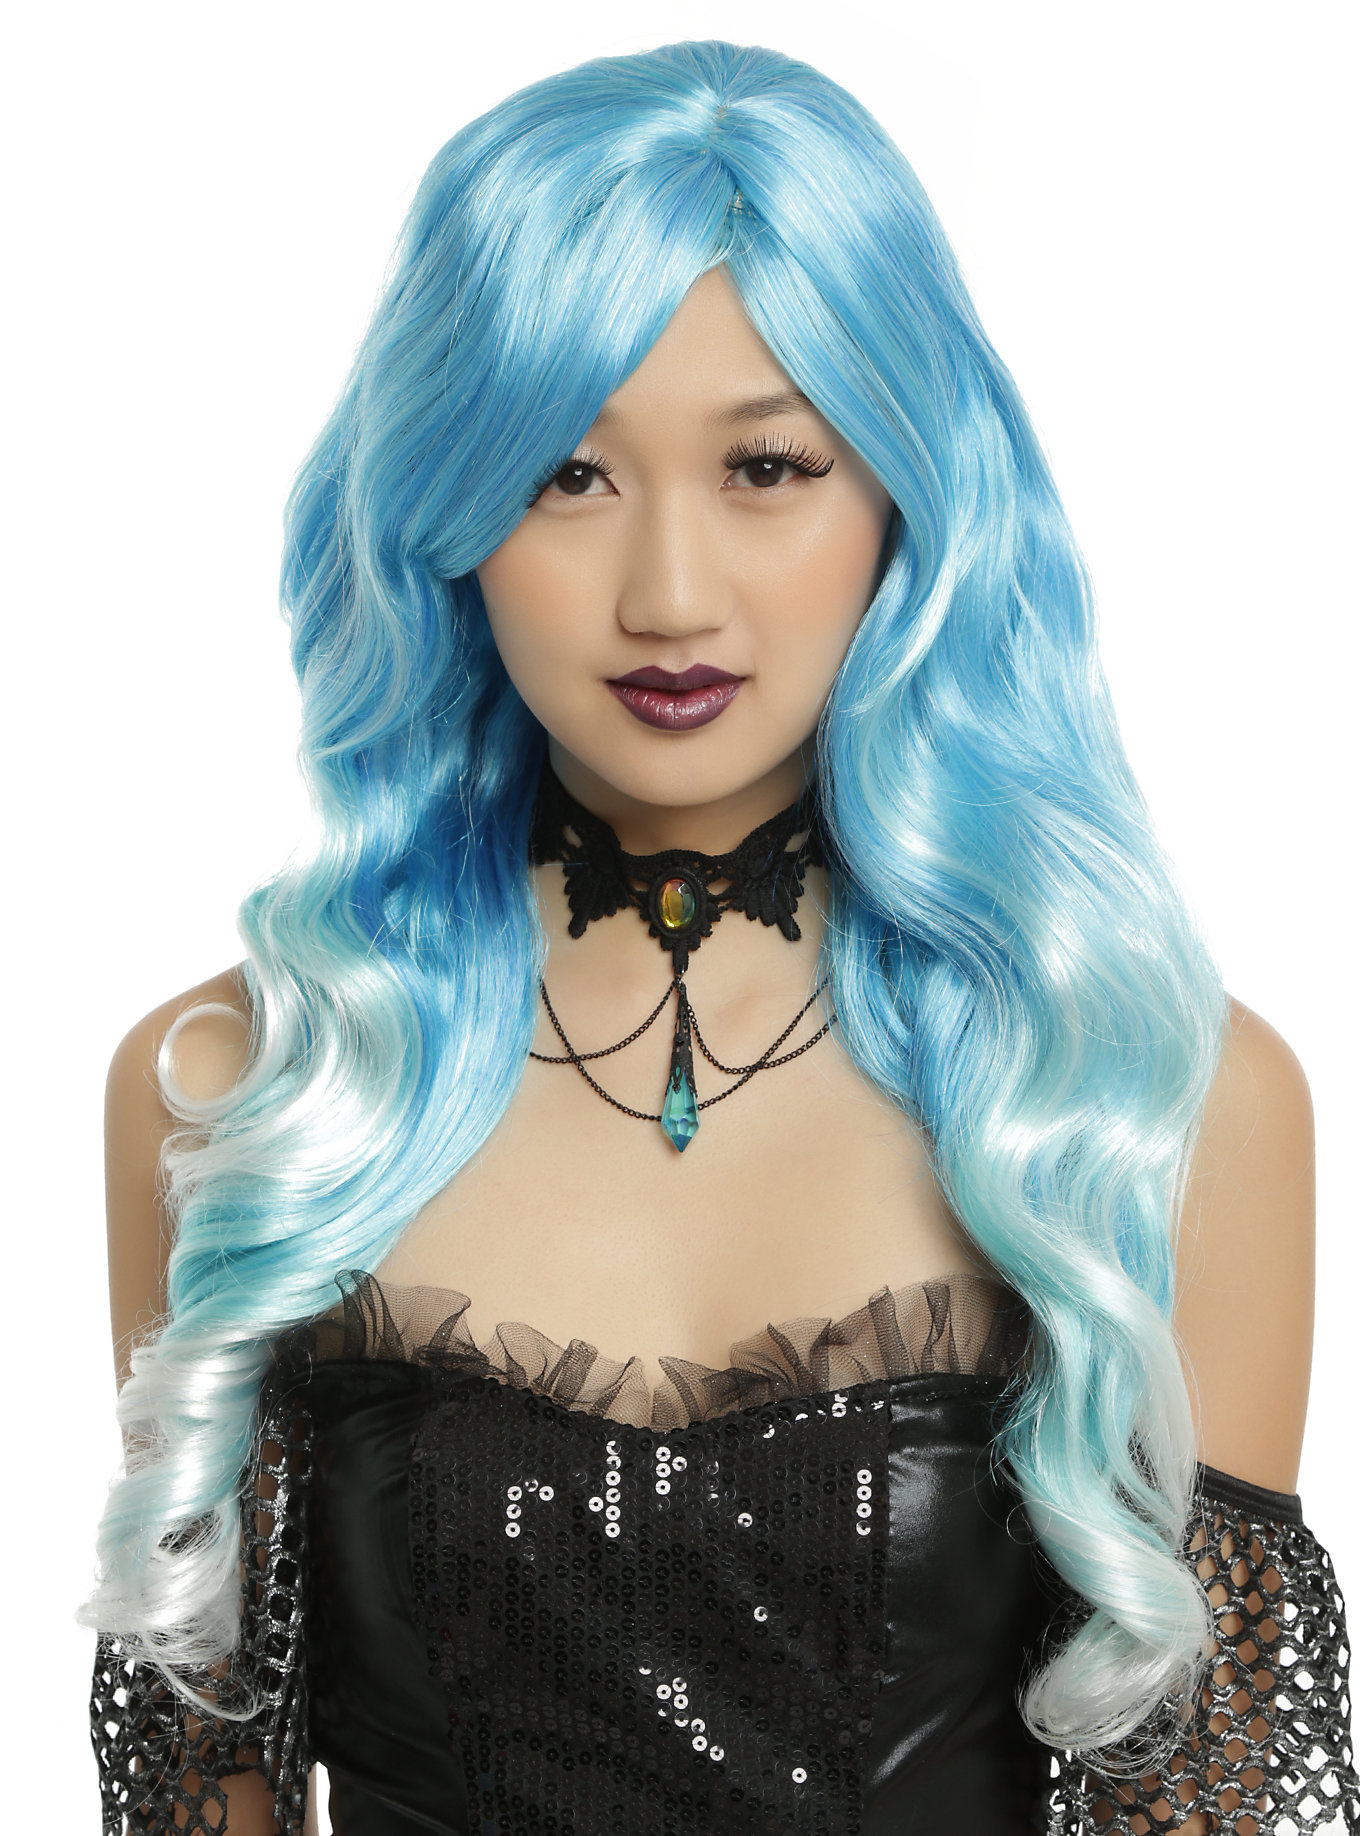 11 Of The Coolest Blue Halloween Wigs To Give You Some Costume